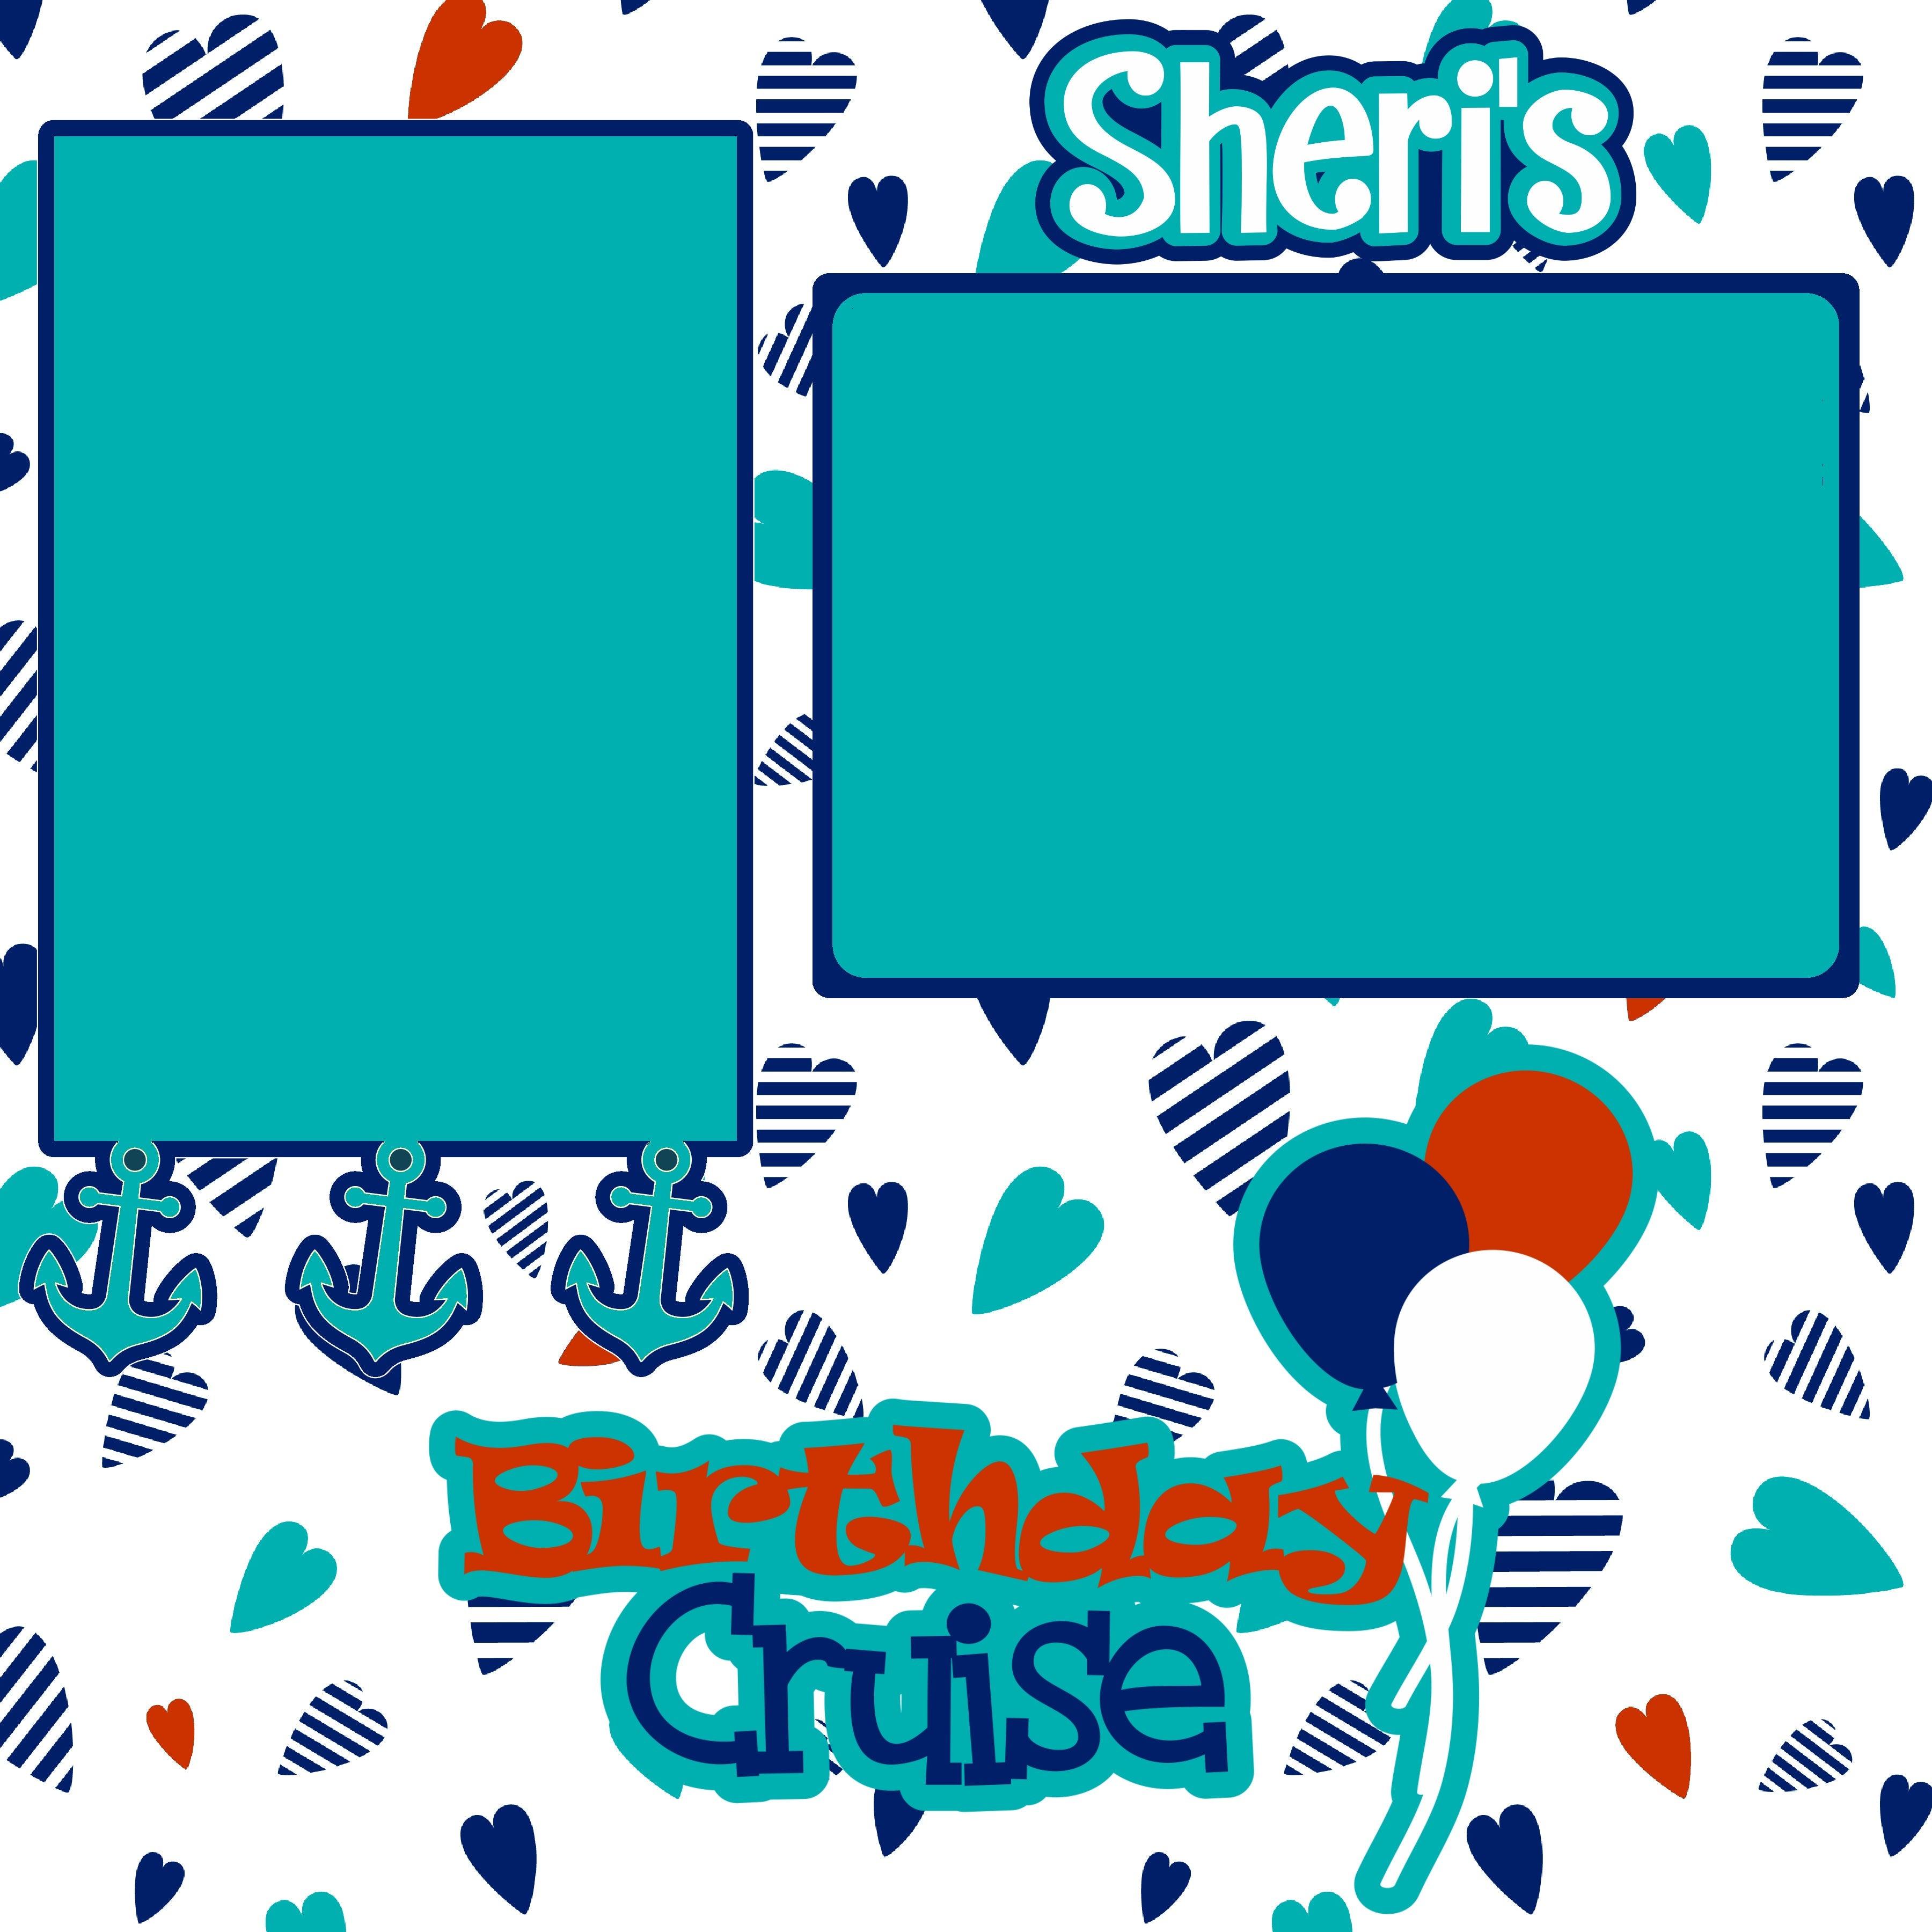 Birthday Cruise **CUSTOM** (2) - 12 x 12 Premade, Printed Scrapbook Pages by SSC Designs - Scrapbook Supply Companies